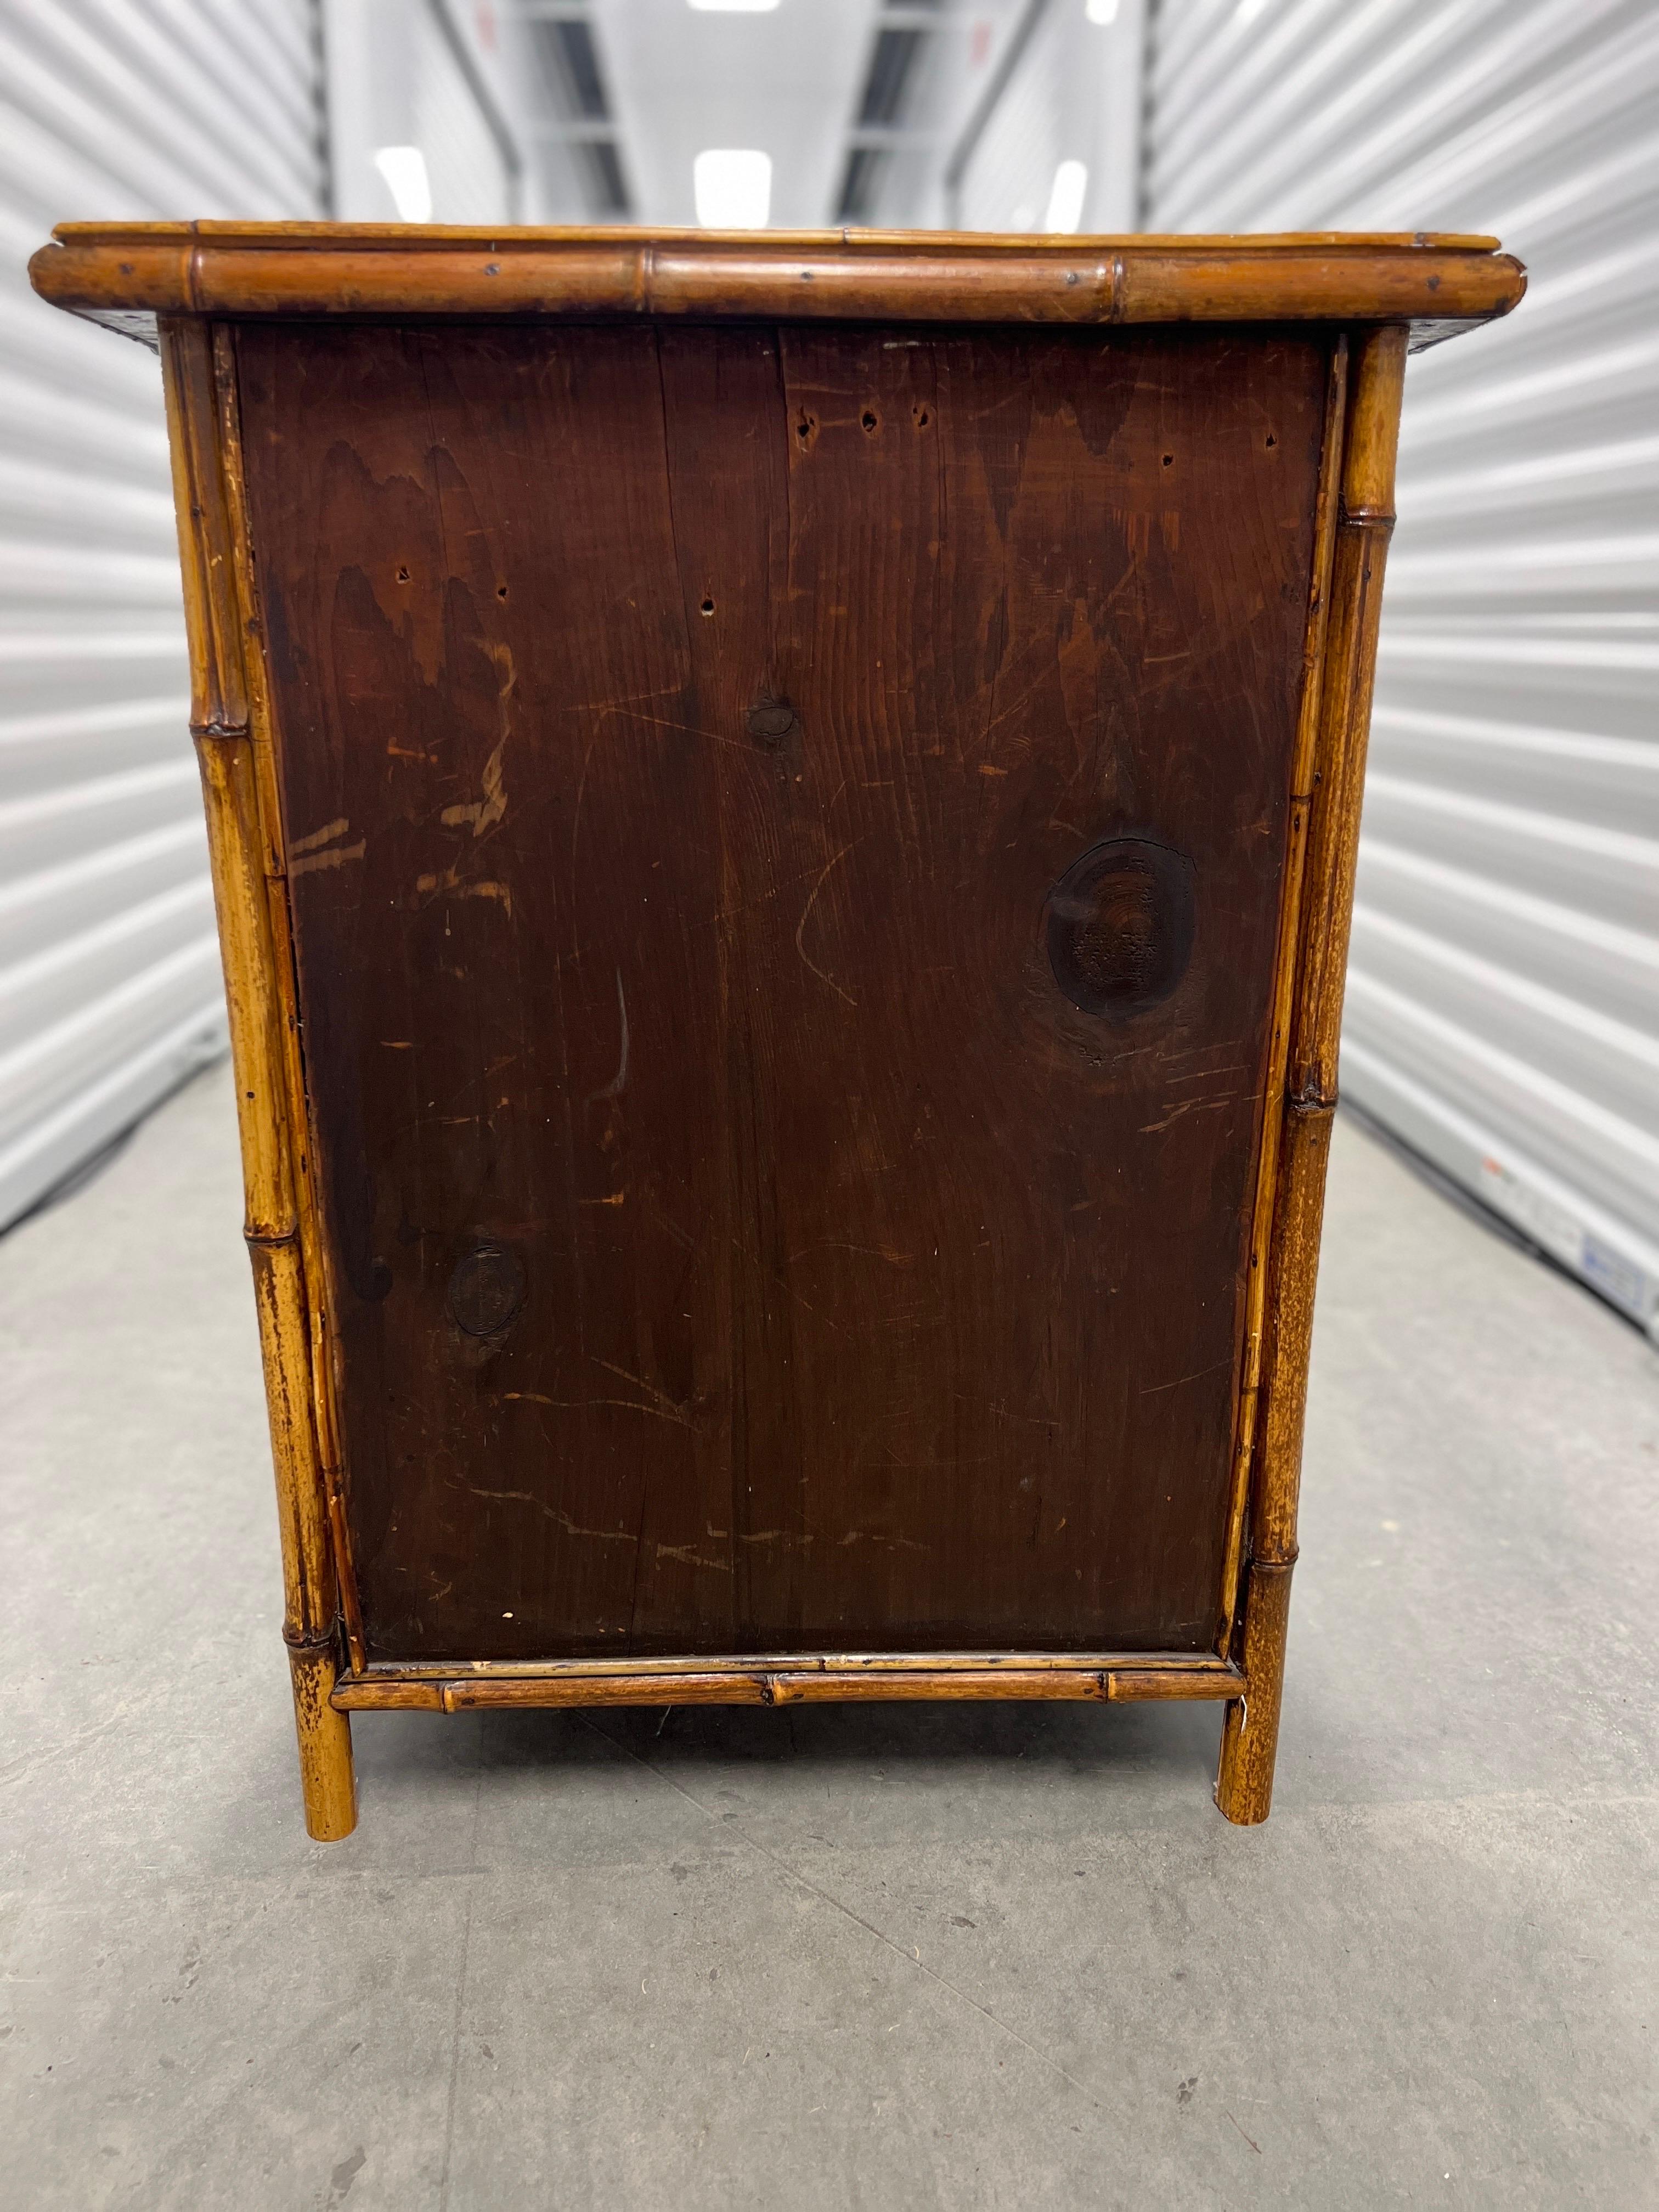 19th Century English Aesthetic Movement Japanned Bamboo Cabinet For Sale 14